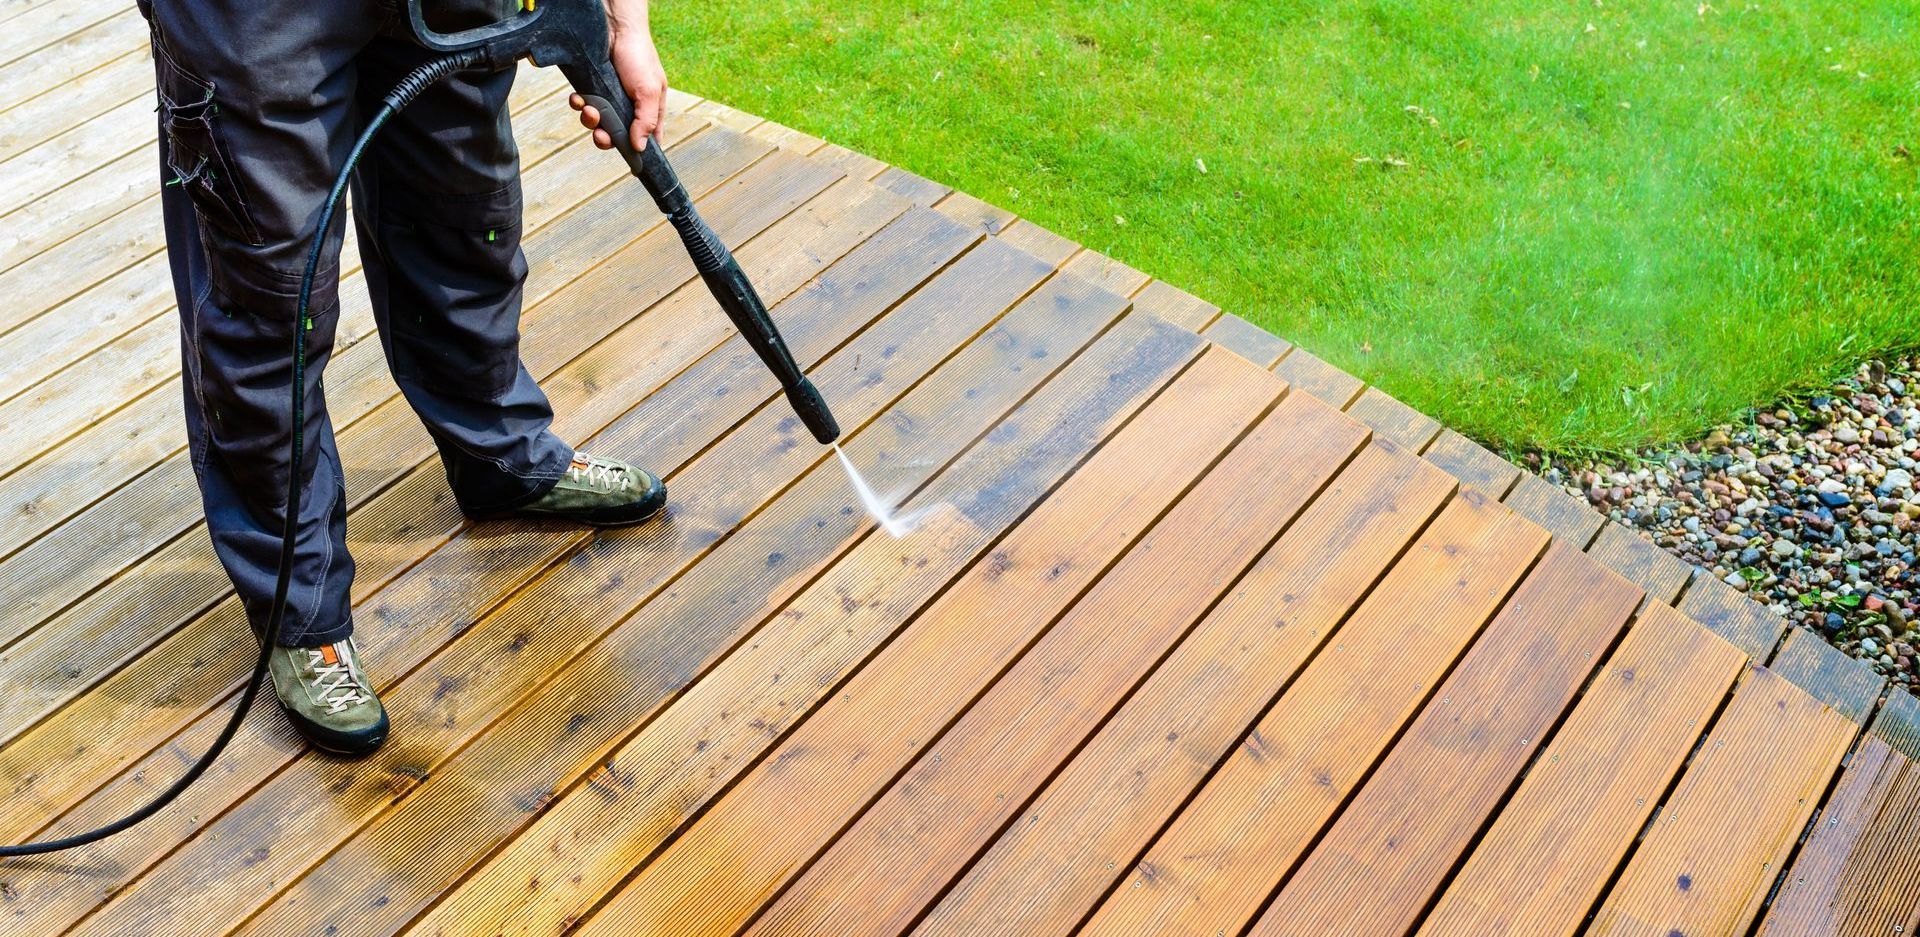 Best Residential Power Washing Company- Power Washer- Mount Airy, MD